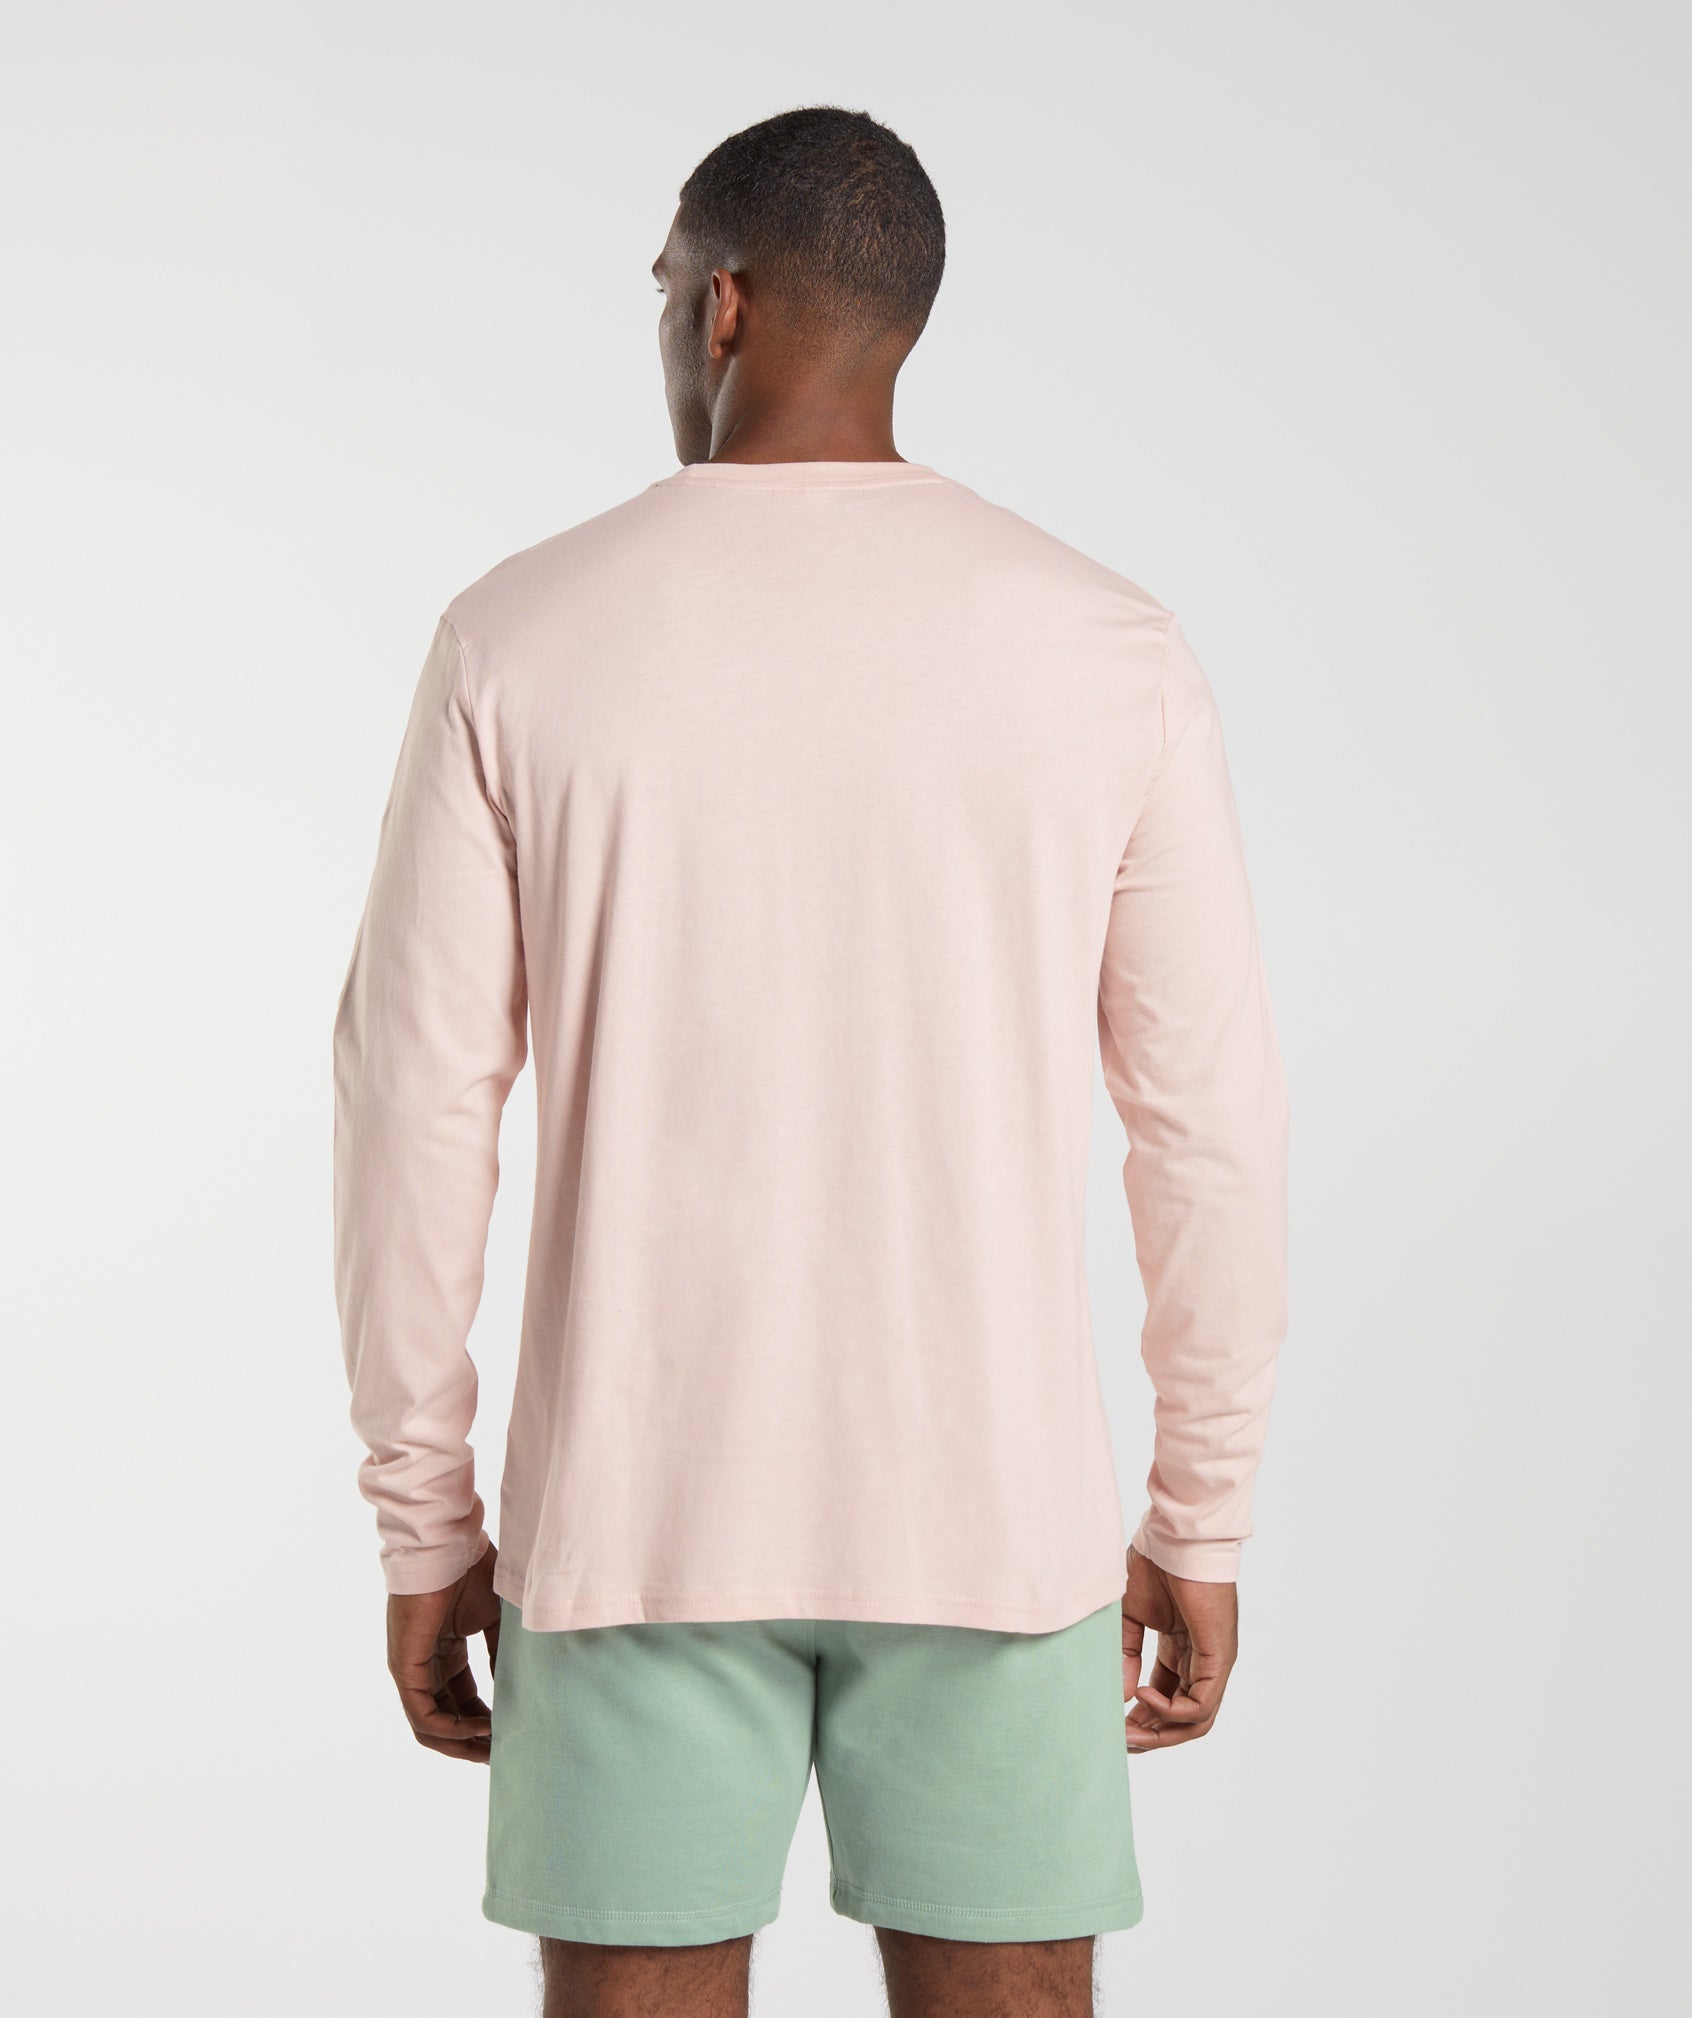 Crest Long Sleeve T-Shirt in Misty Pink